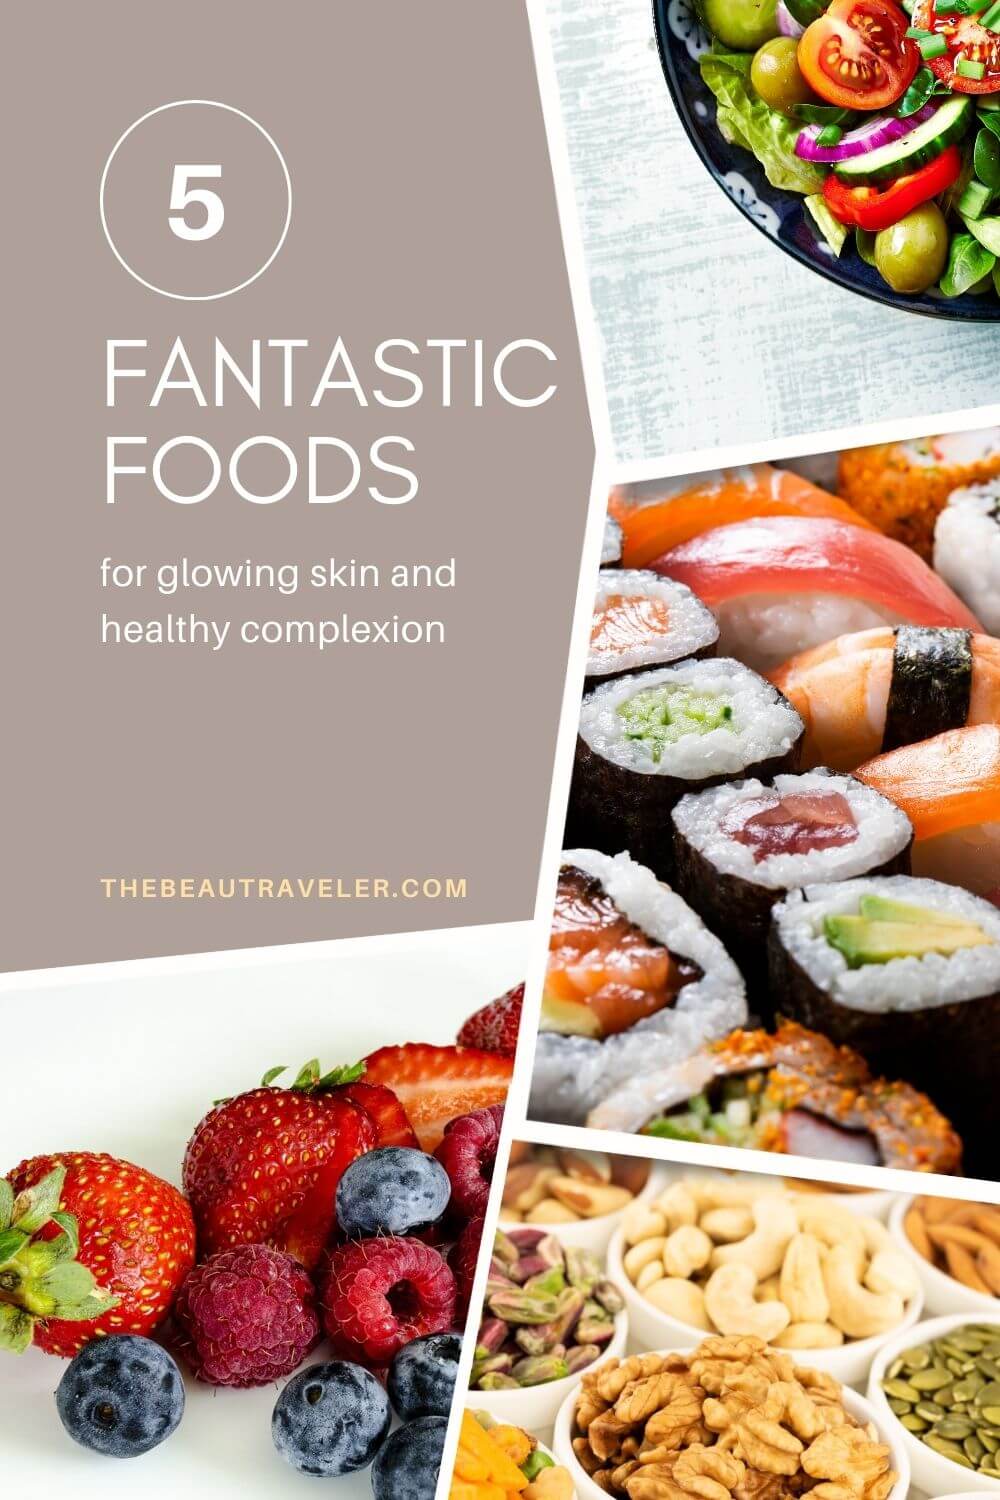 5 Fantastic Foods For Glowing Skin And A Healthy Complexion - The BeauTraveler